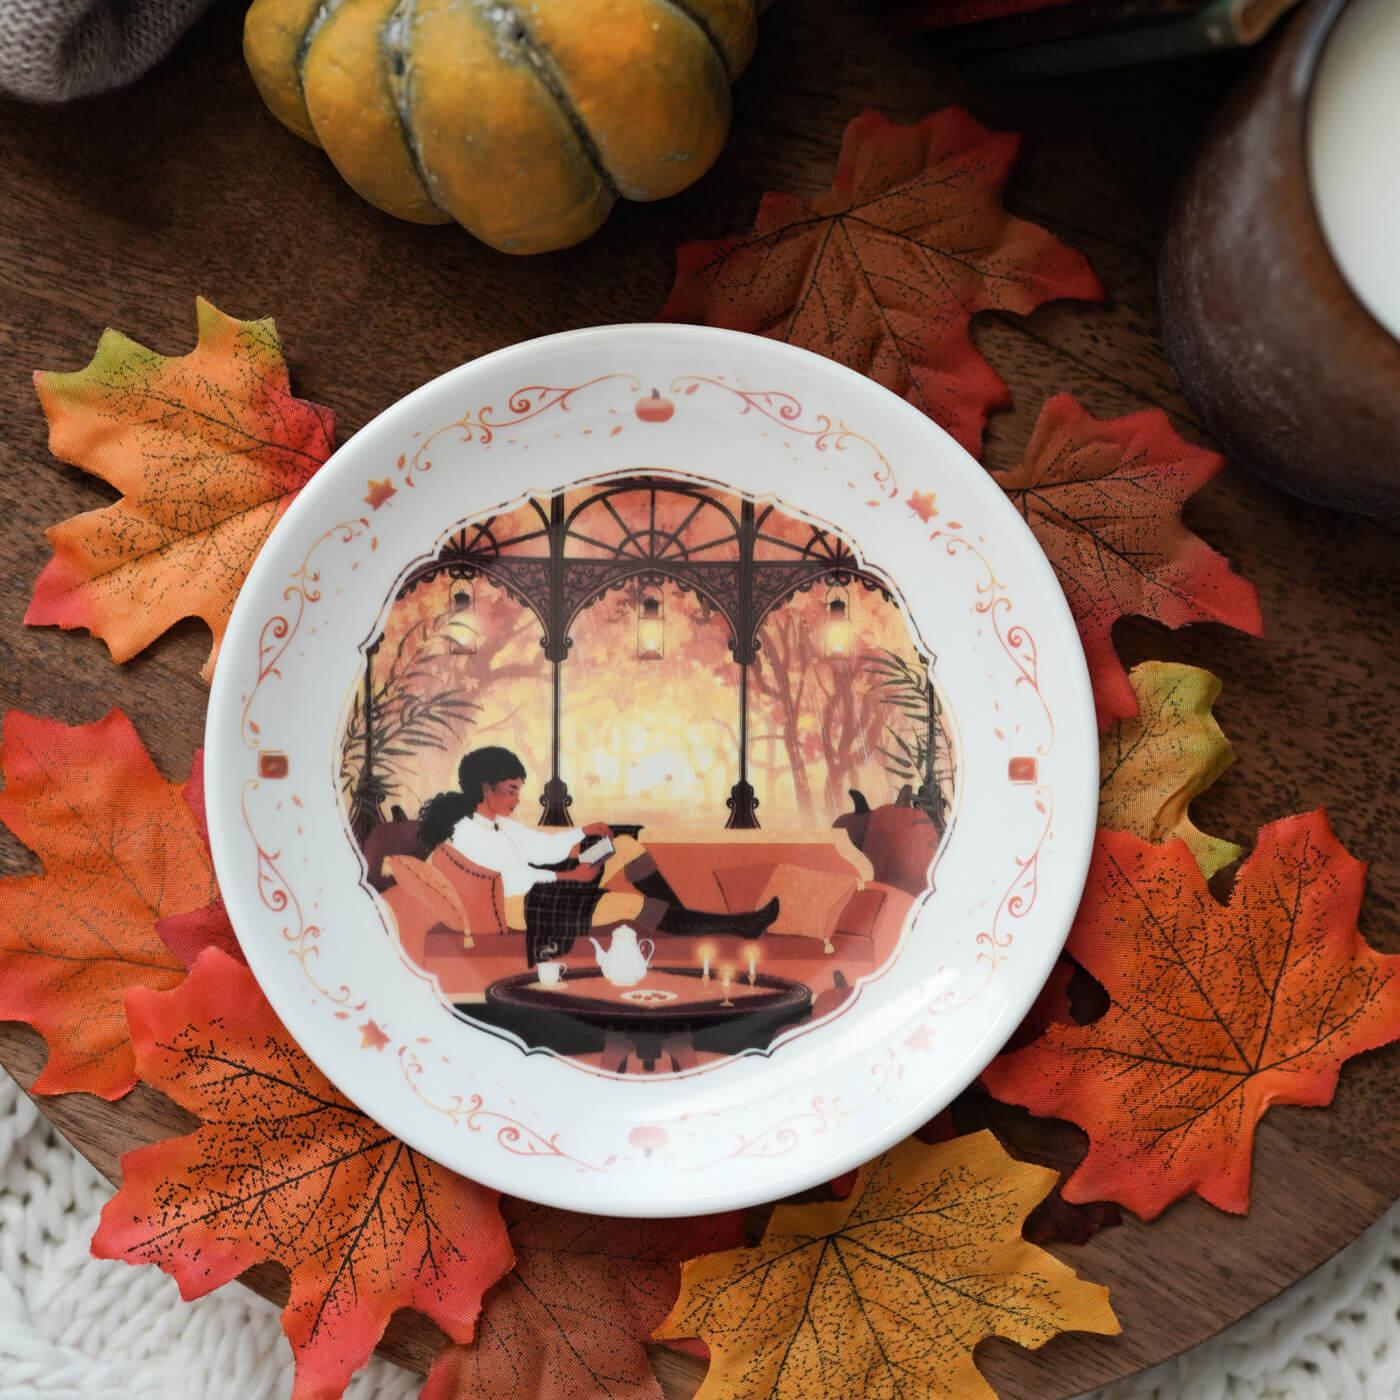 A decorative plate with a person reading in an autumn decorated book room with a window looking out into autumn